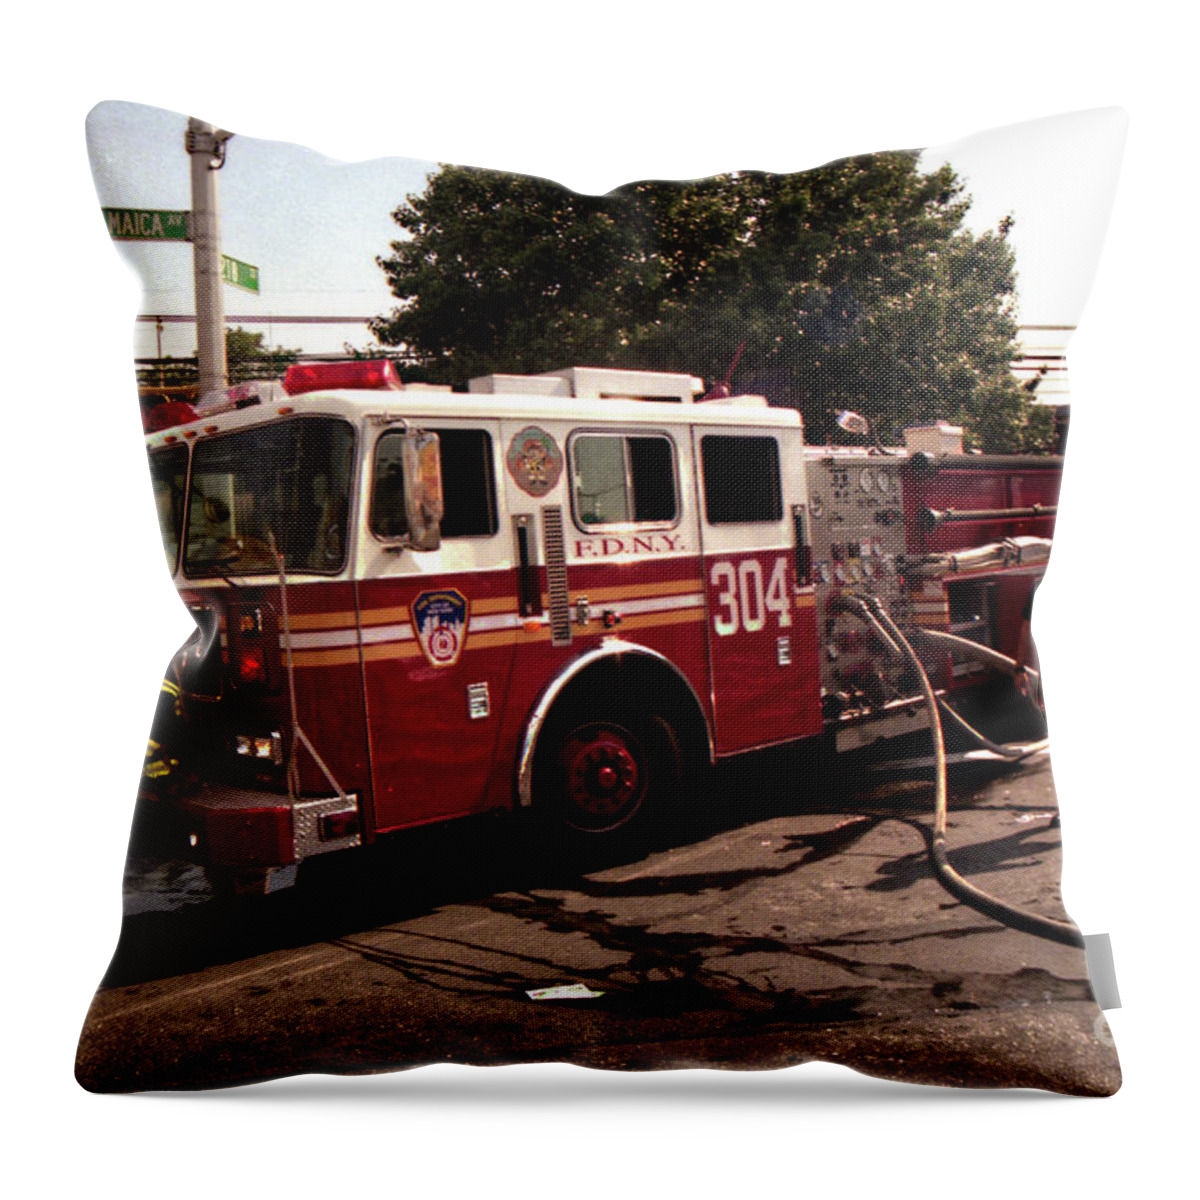 Fdny Throw Pillow featuring the photograph FDNY Engine 304 #1 by Steven Spak